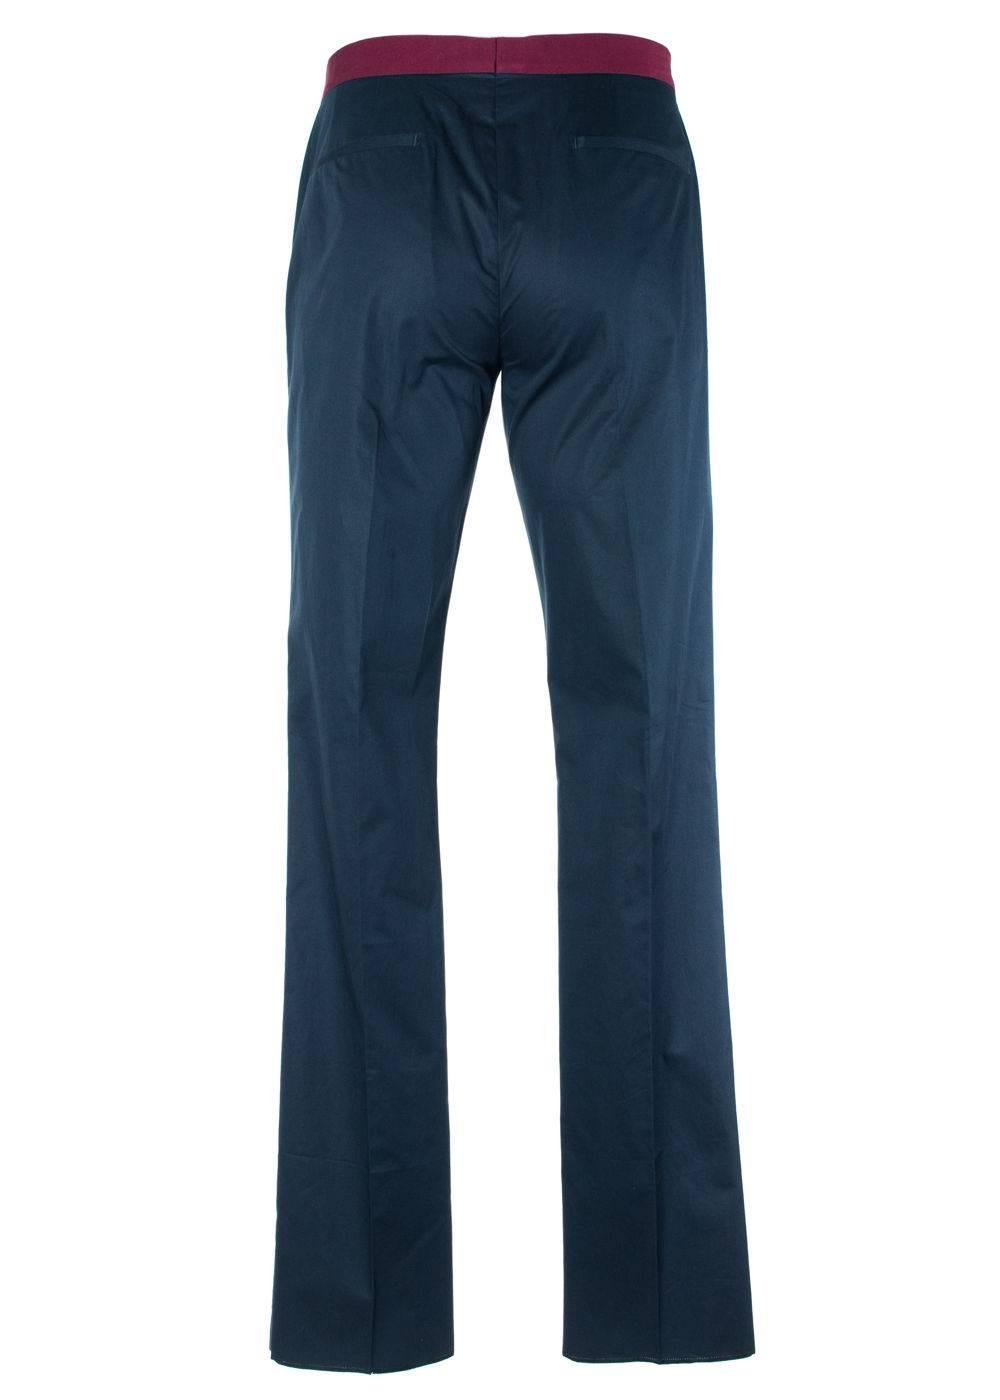 
Brand New Givenchy Men's Trousers
Original Tags
Retails in Stores & Online for $495
Men's Size E48 / US32 Fits True to Size

Givenchy's take on a classic trouser silhouette with a navy palette and maroon accented waist band. Classy with a twist in